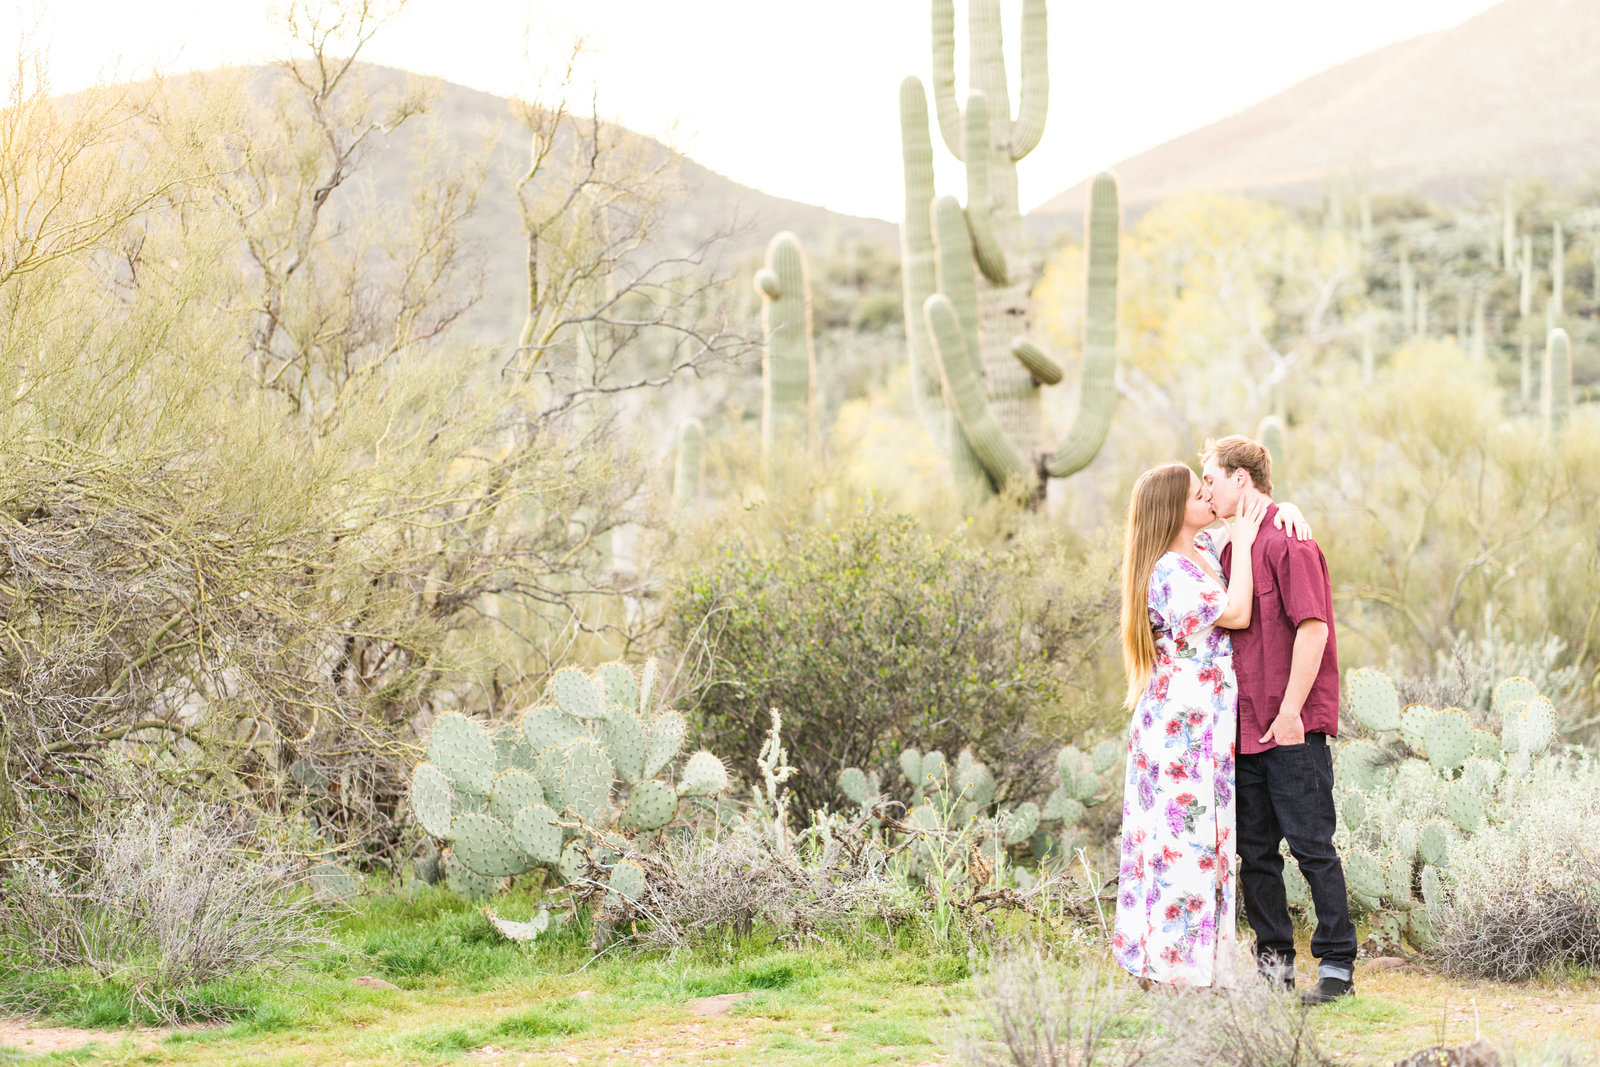 Couple kissing in front of mountains in desert